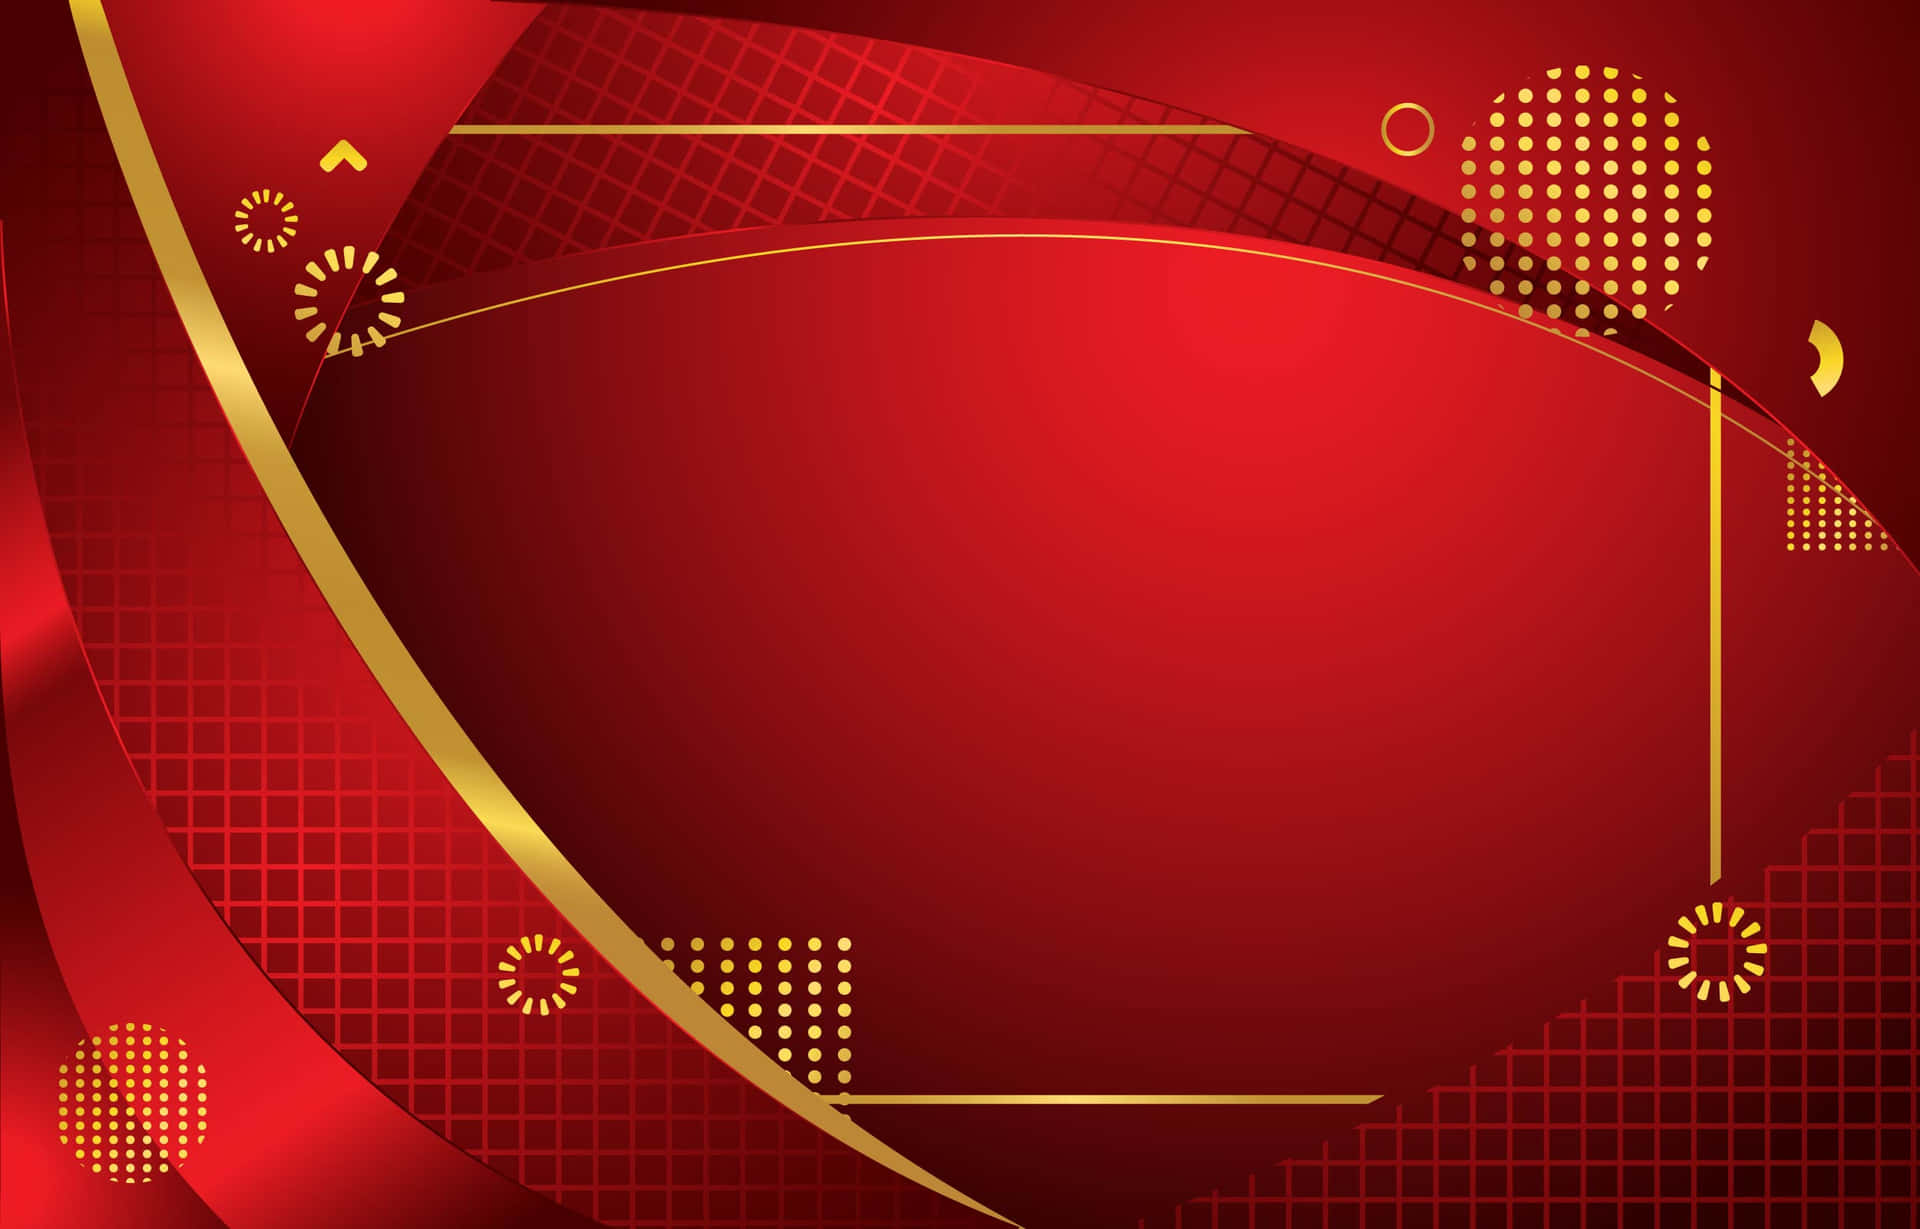 Download Red Background With Gold Geometric Shapes | Wallpapers.com